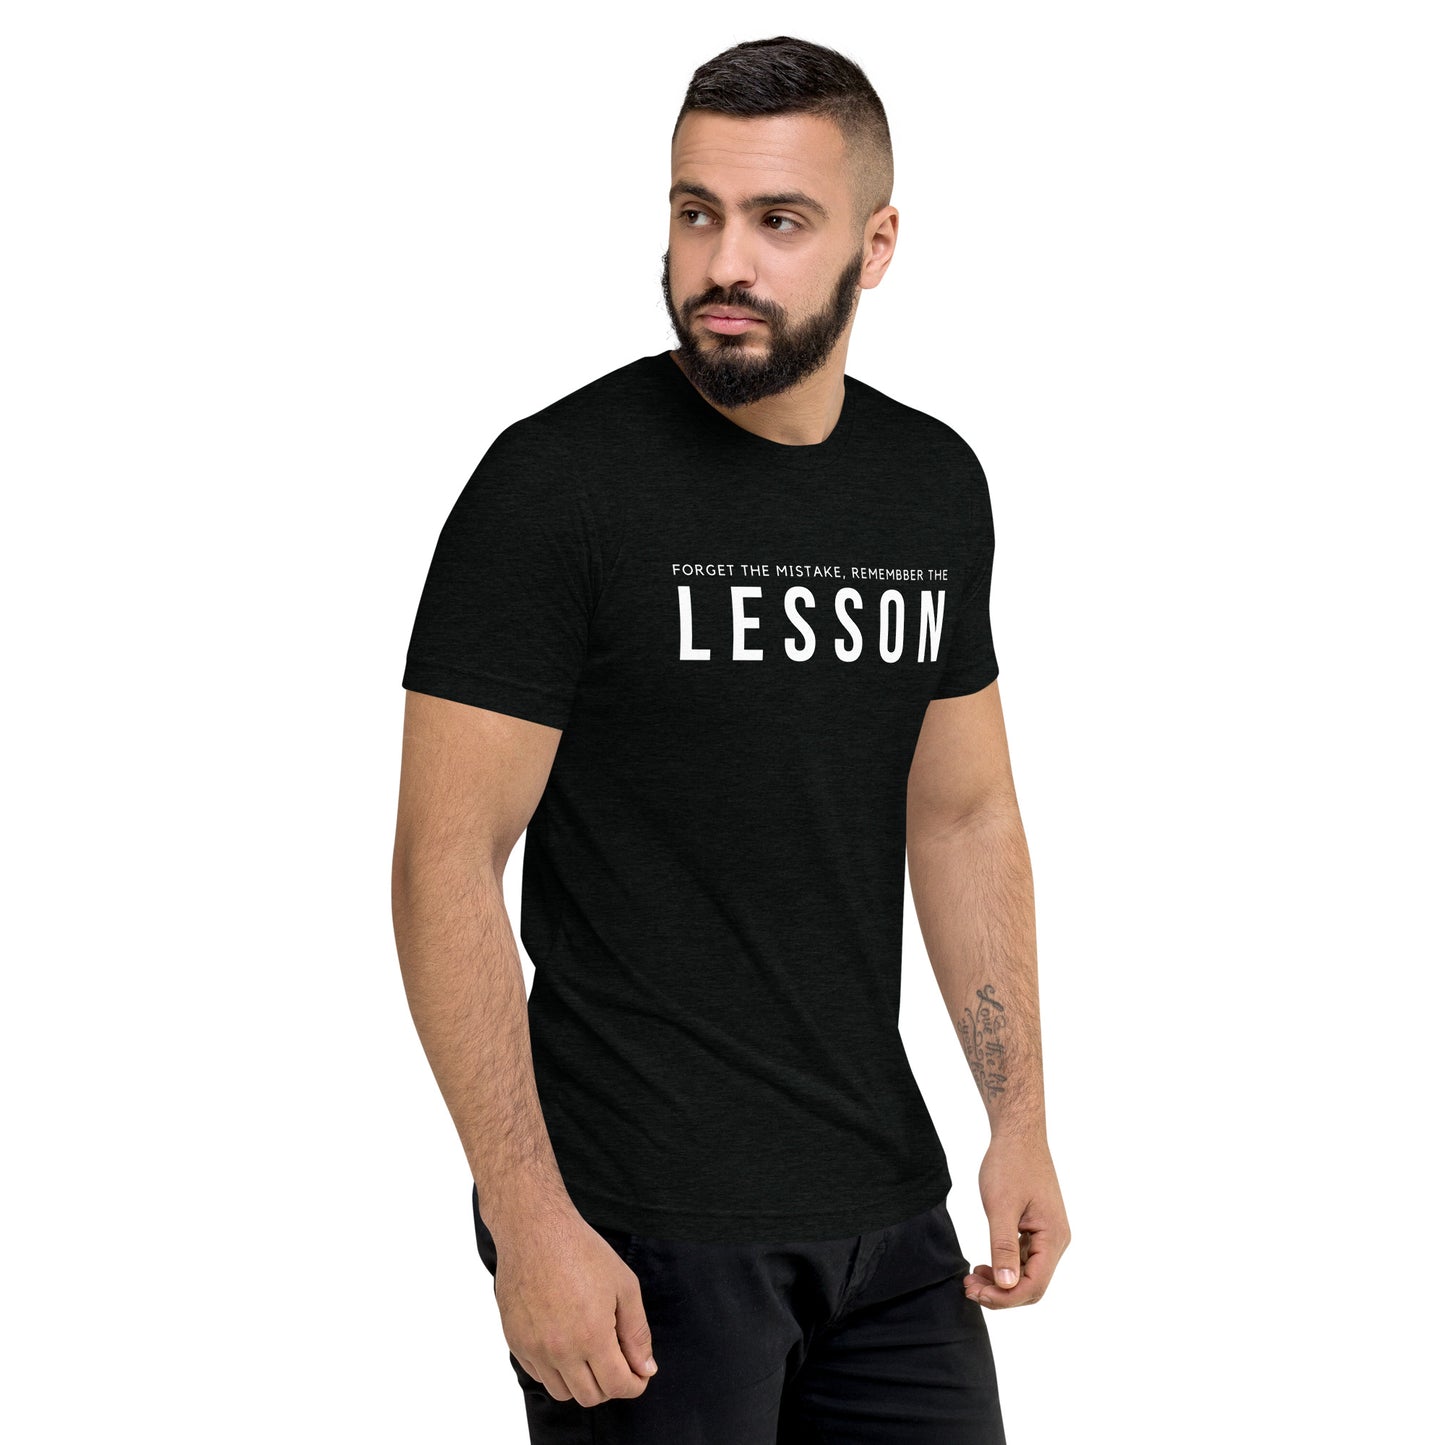 Learn The Lesson - Men's